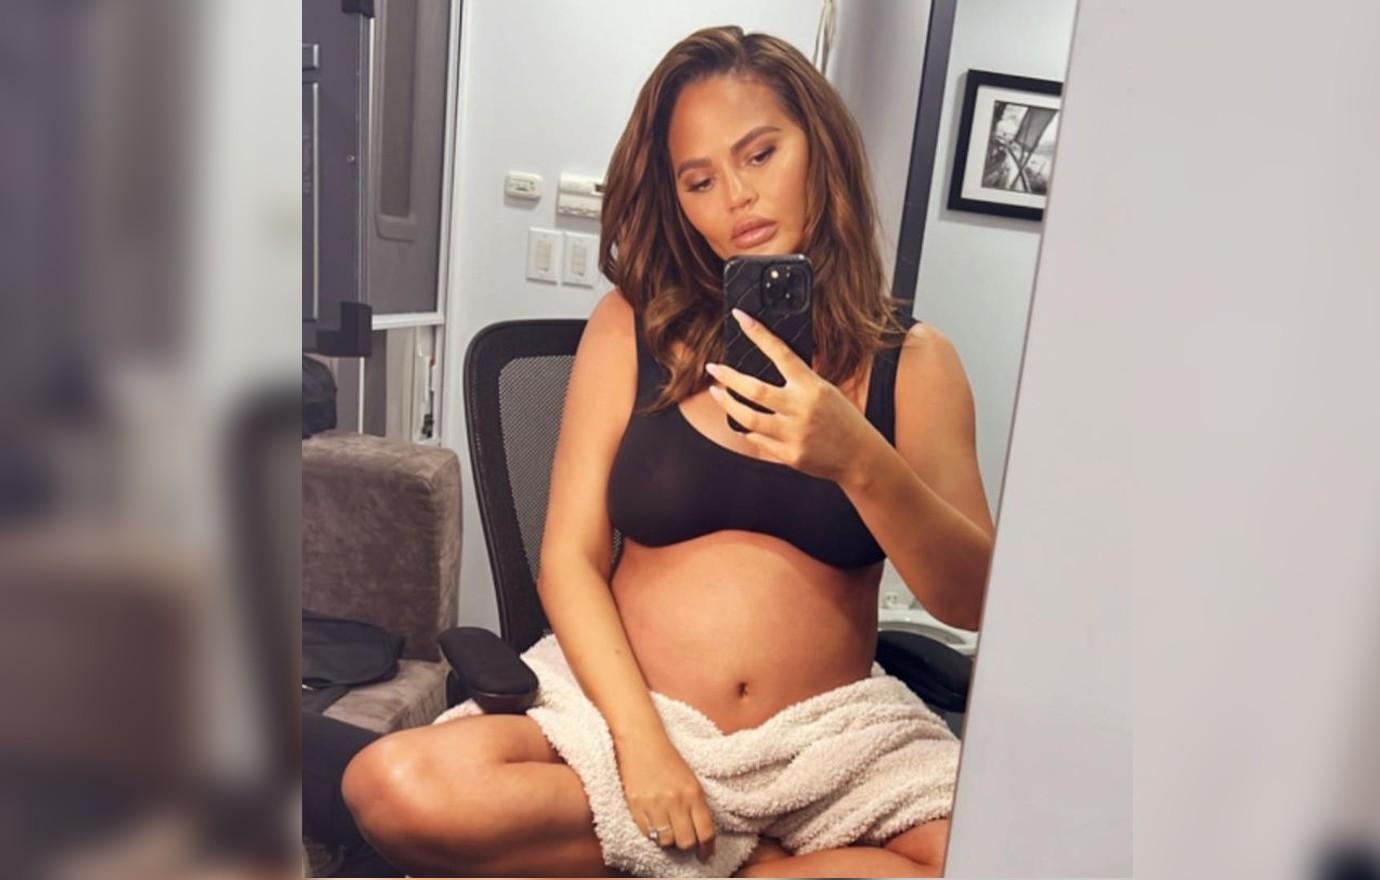 Chrissy Teigen Flaunts Her Baby Bump at the Gym